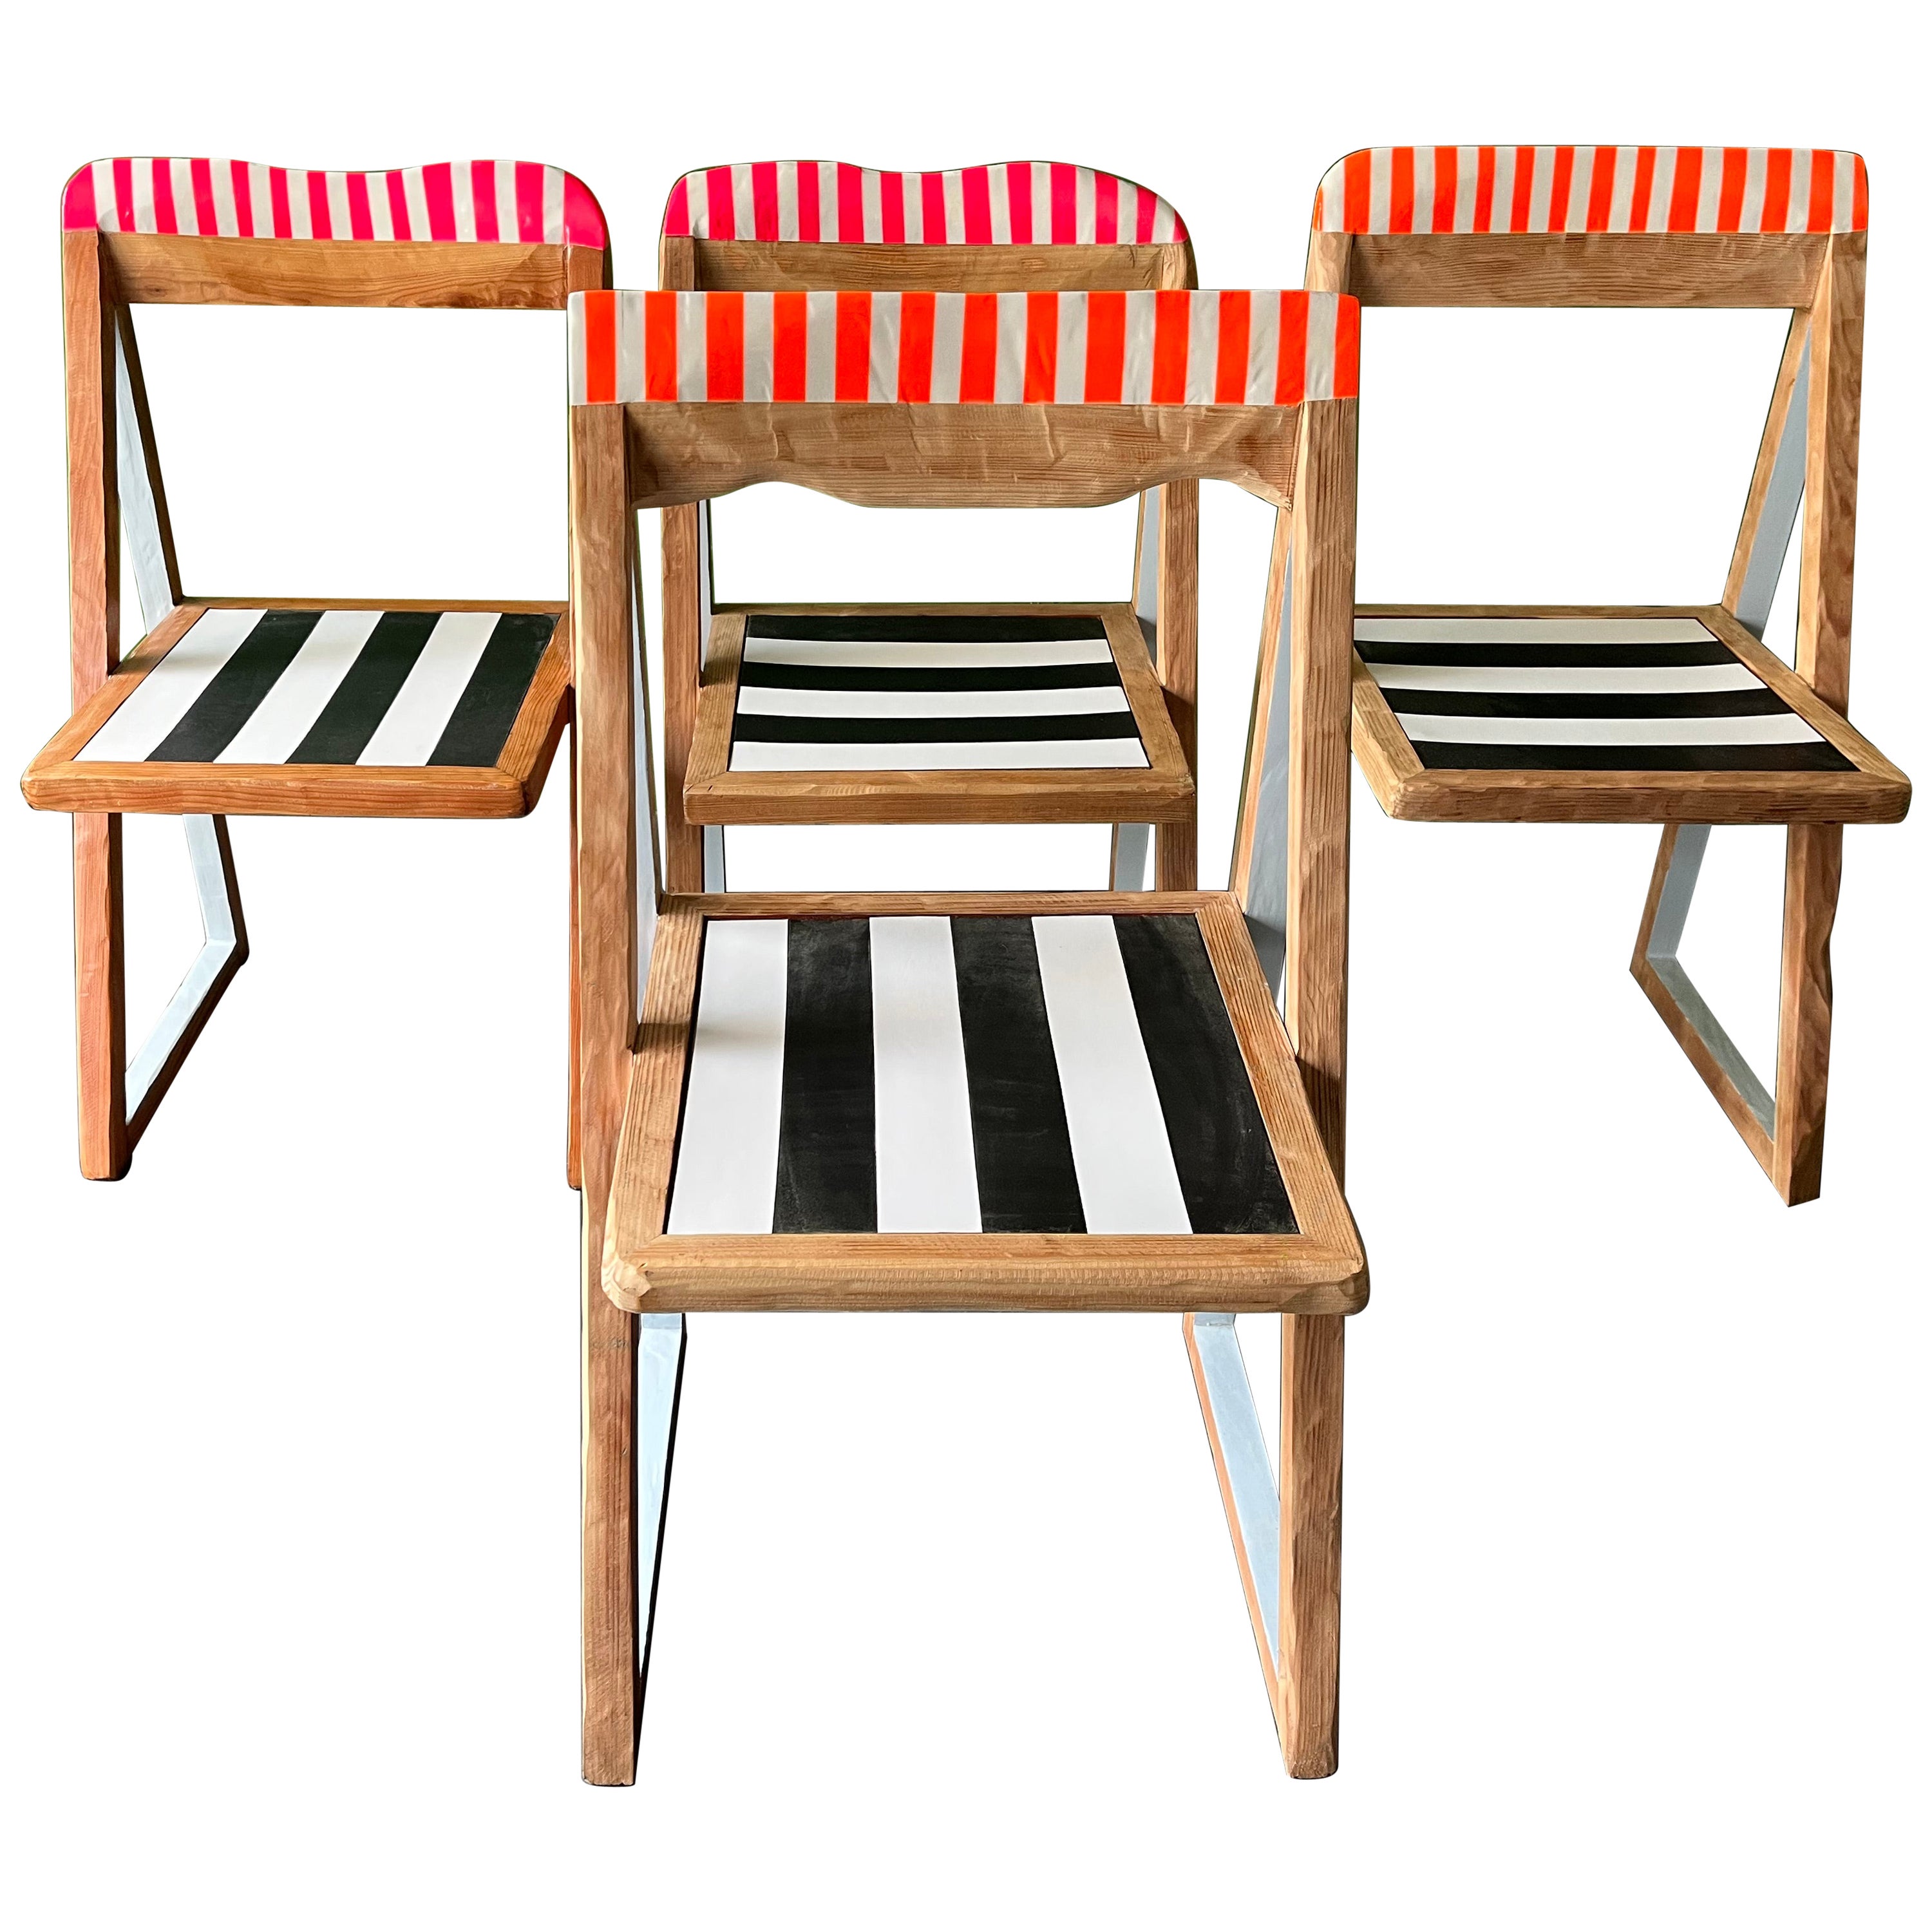 Black and white and pink, 4 dining chairs by Markus Friedrich Staab